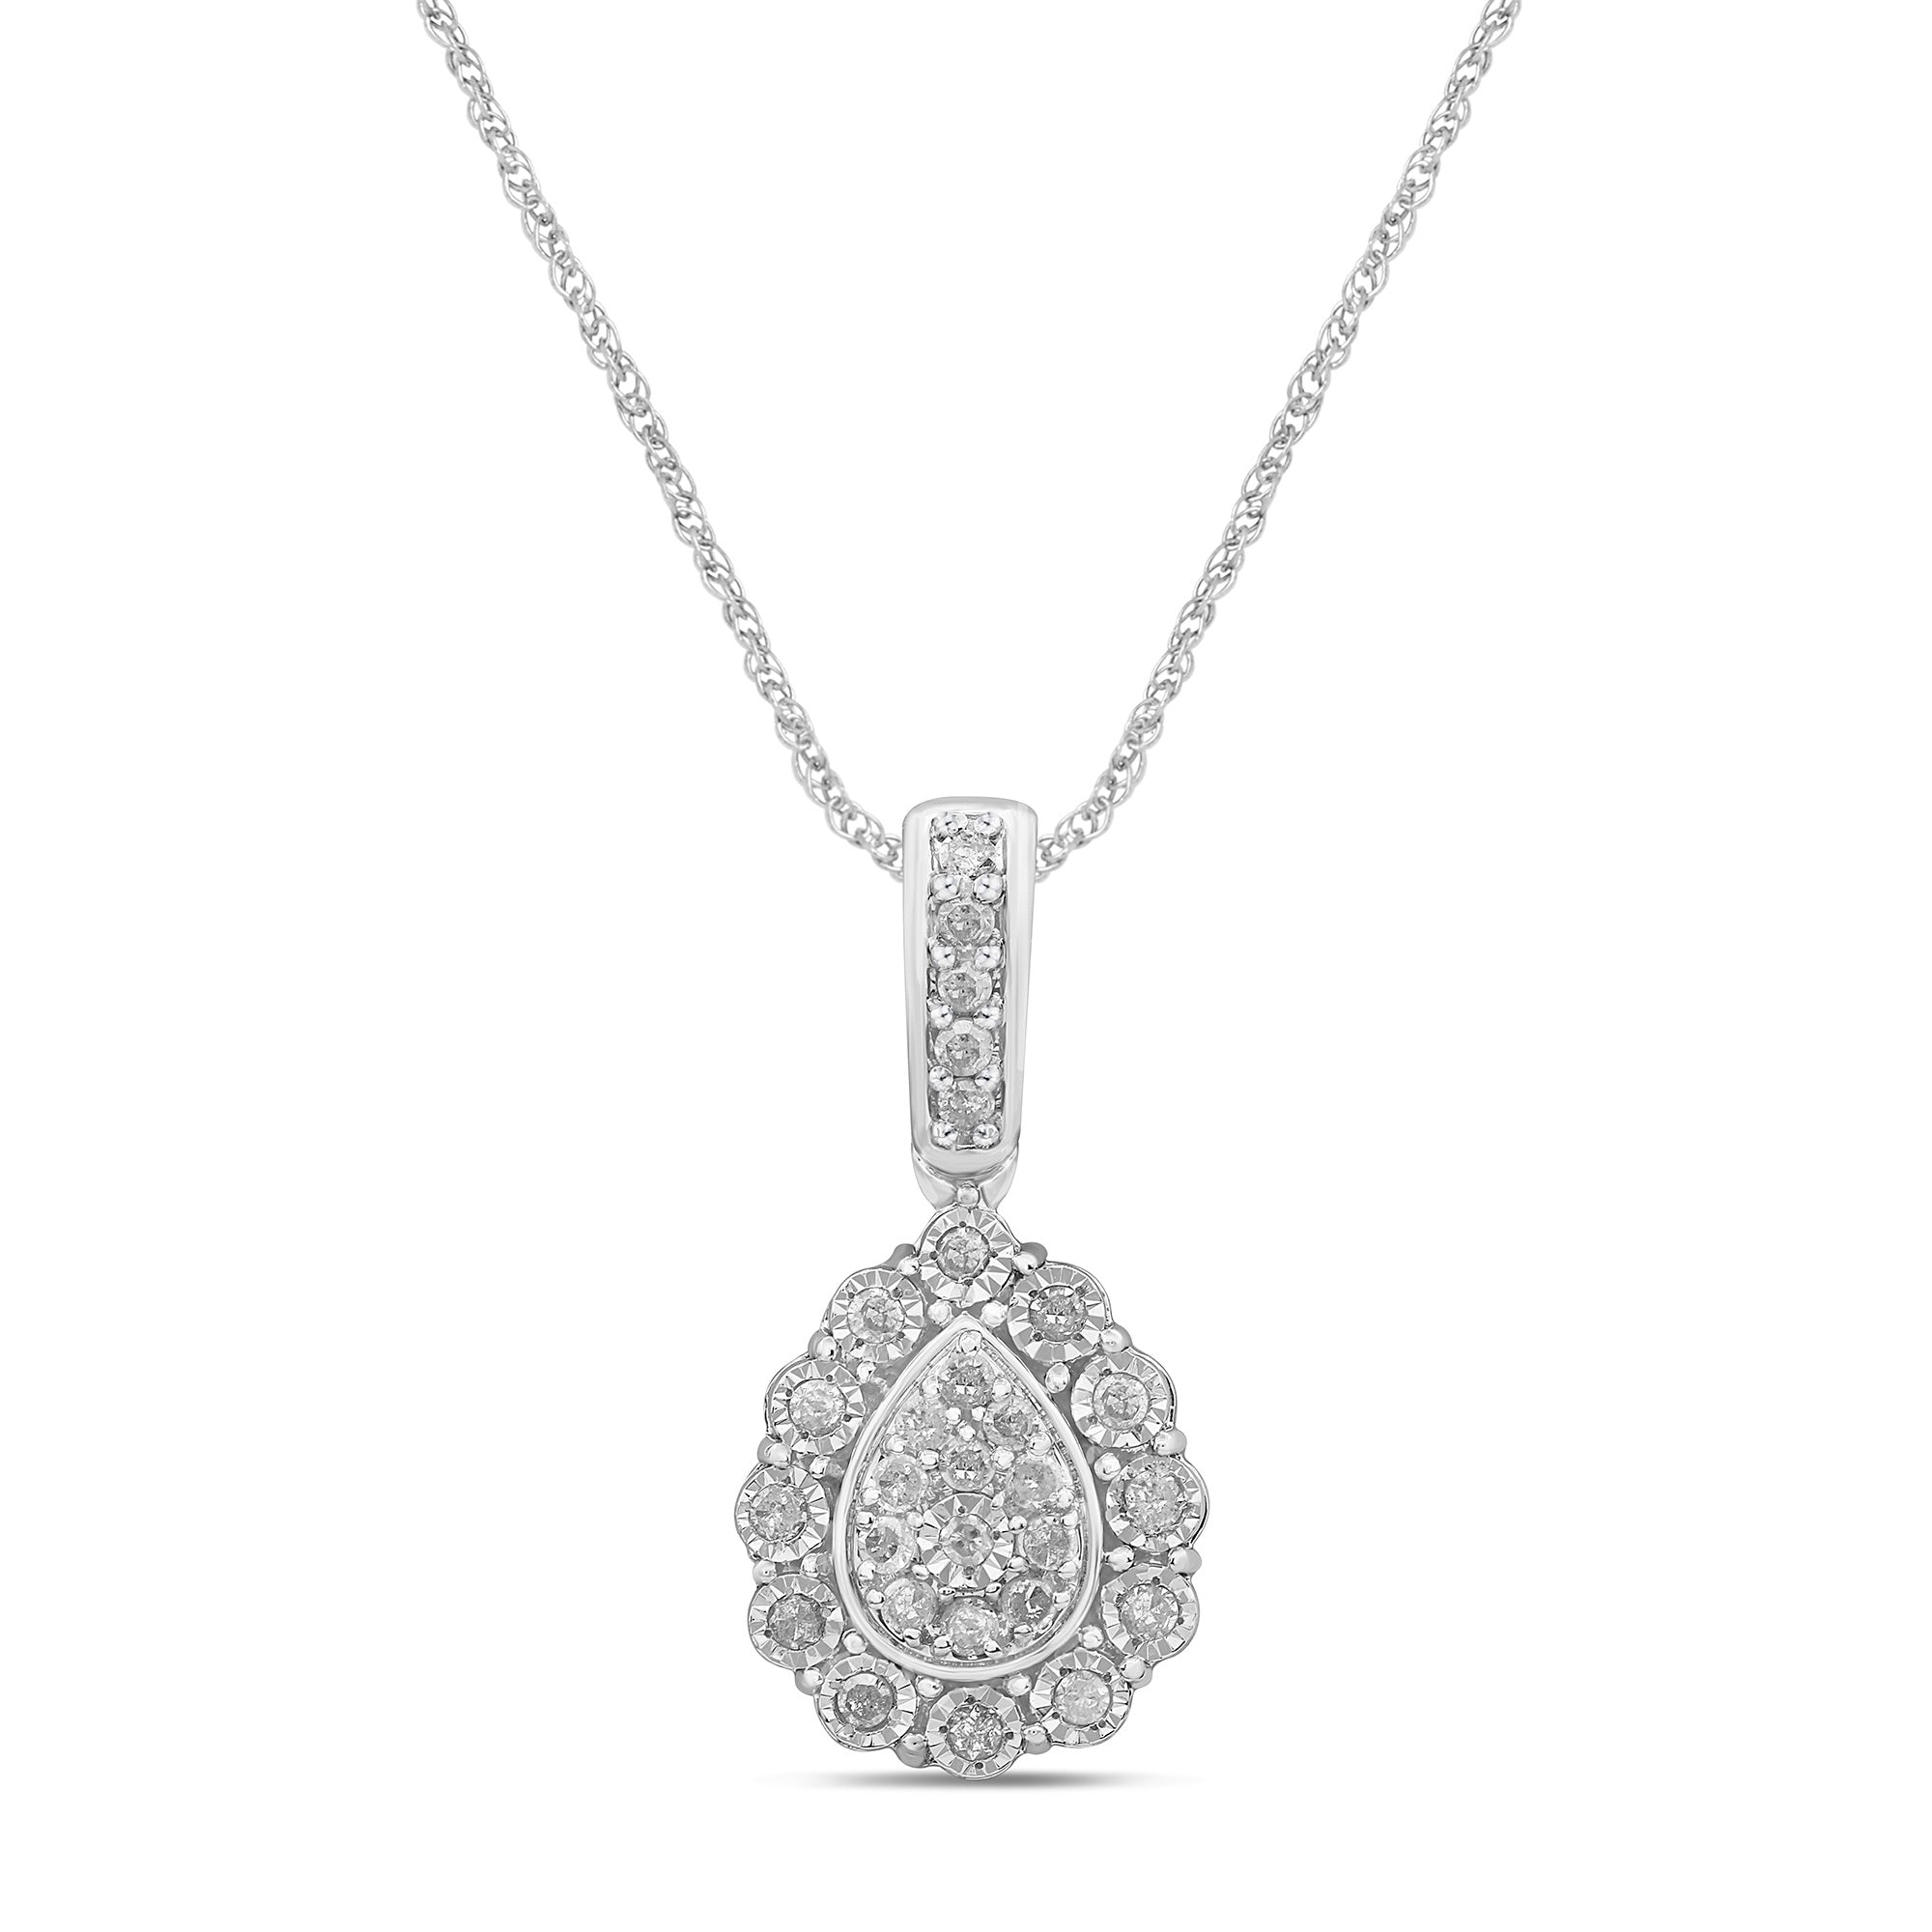 Fancy Pear Shape Necklace with 0.15ct of Diamonds in Sterling Silver Necklaces Bevilles 